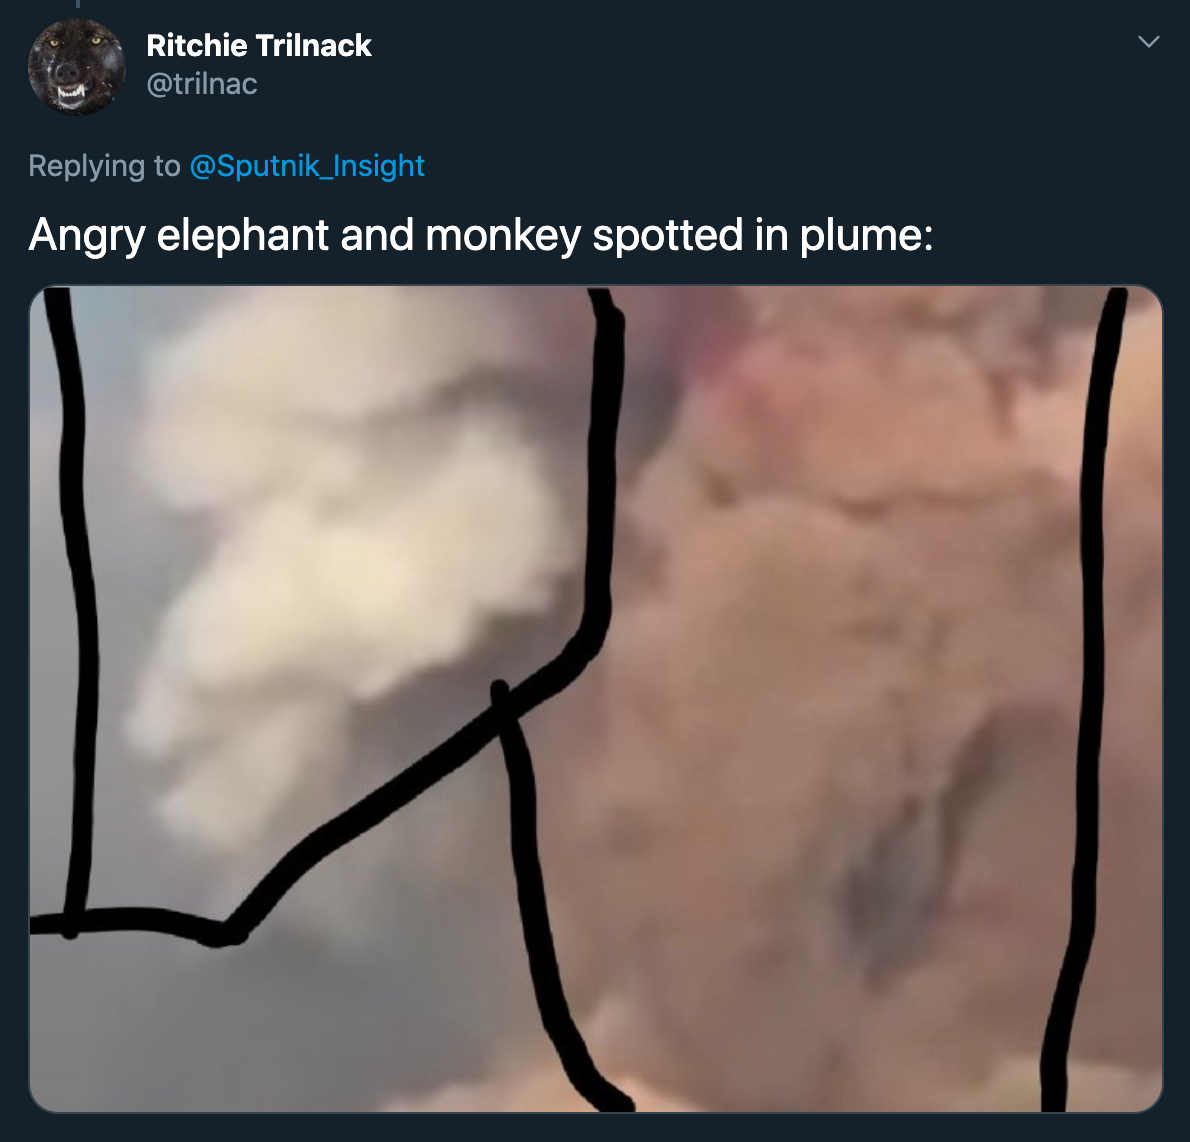 august 4 2020 explosions in beirut lebanon - angry elephant and monkey spotted in plume